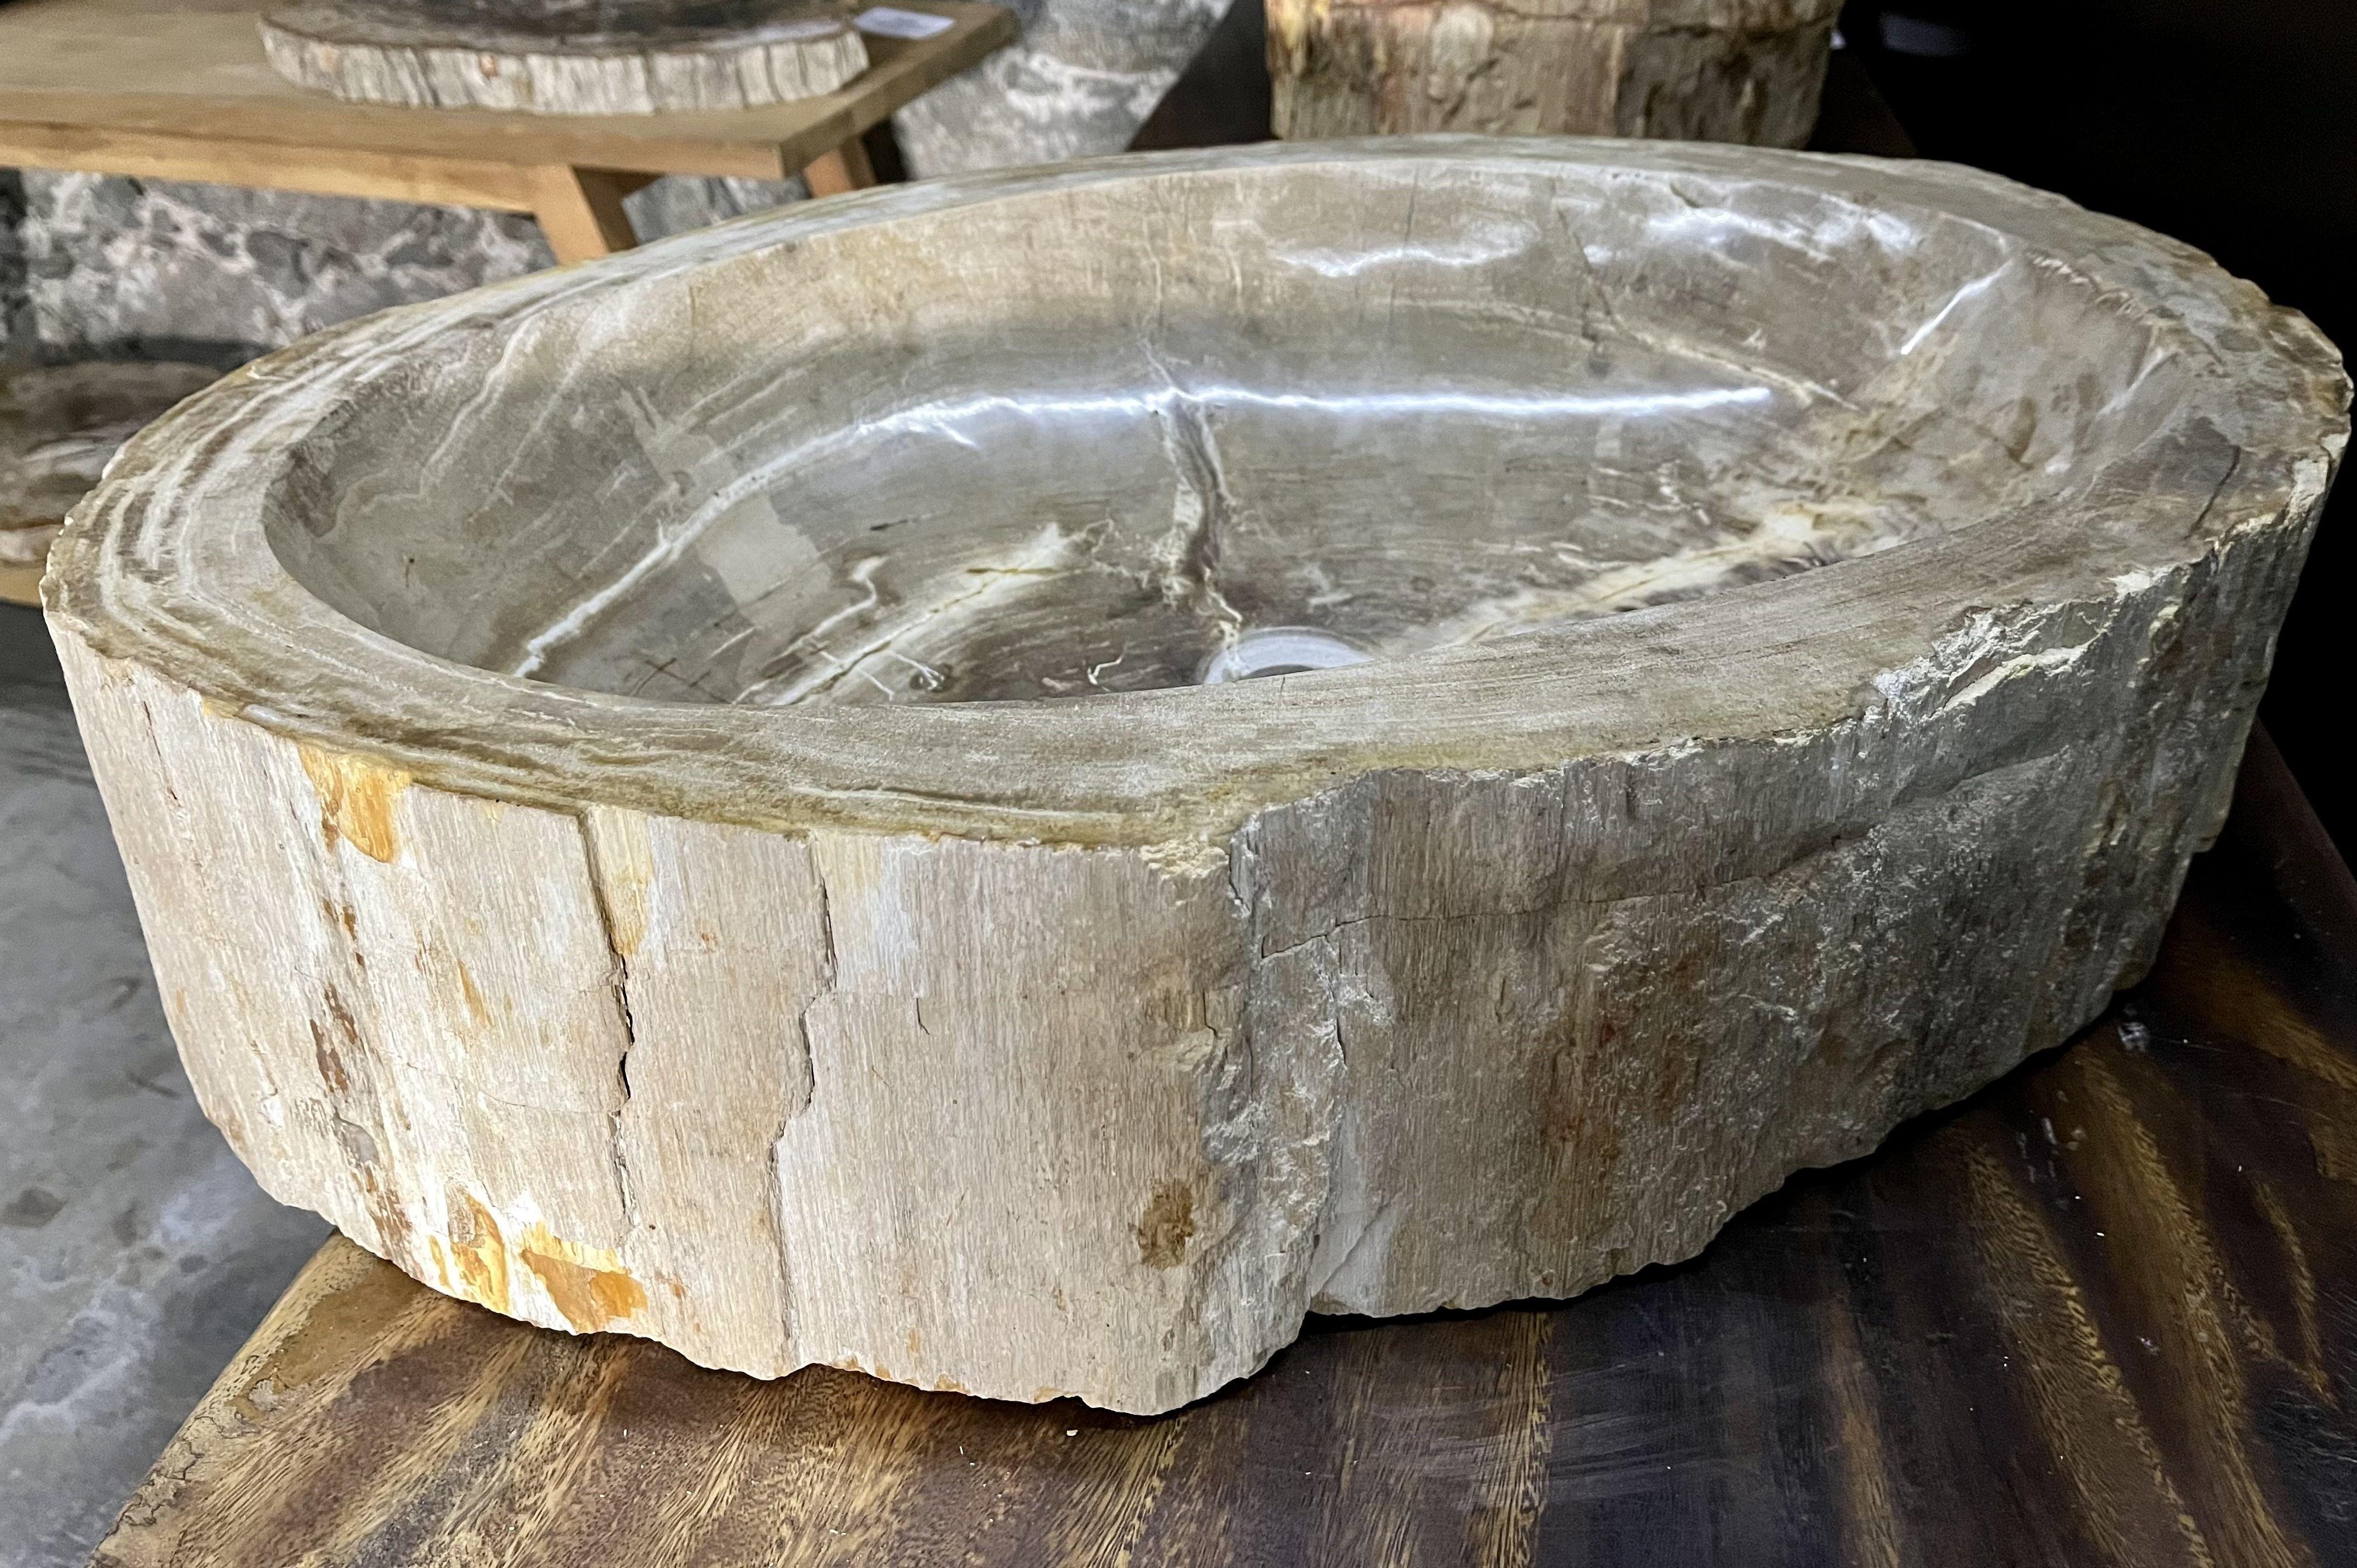 Exceptional petrified wood sink in absolute top quality. This organic modern sink impresses with a beautiful oval shape and a fantastic natural coloration in beige, brown and grey tones which are incomparable. The inside of the sink shows a polished